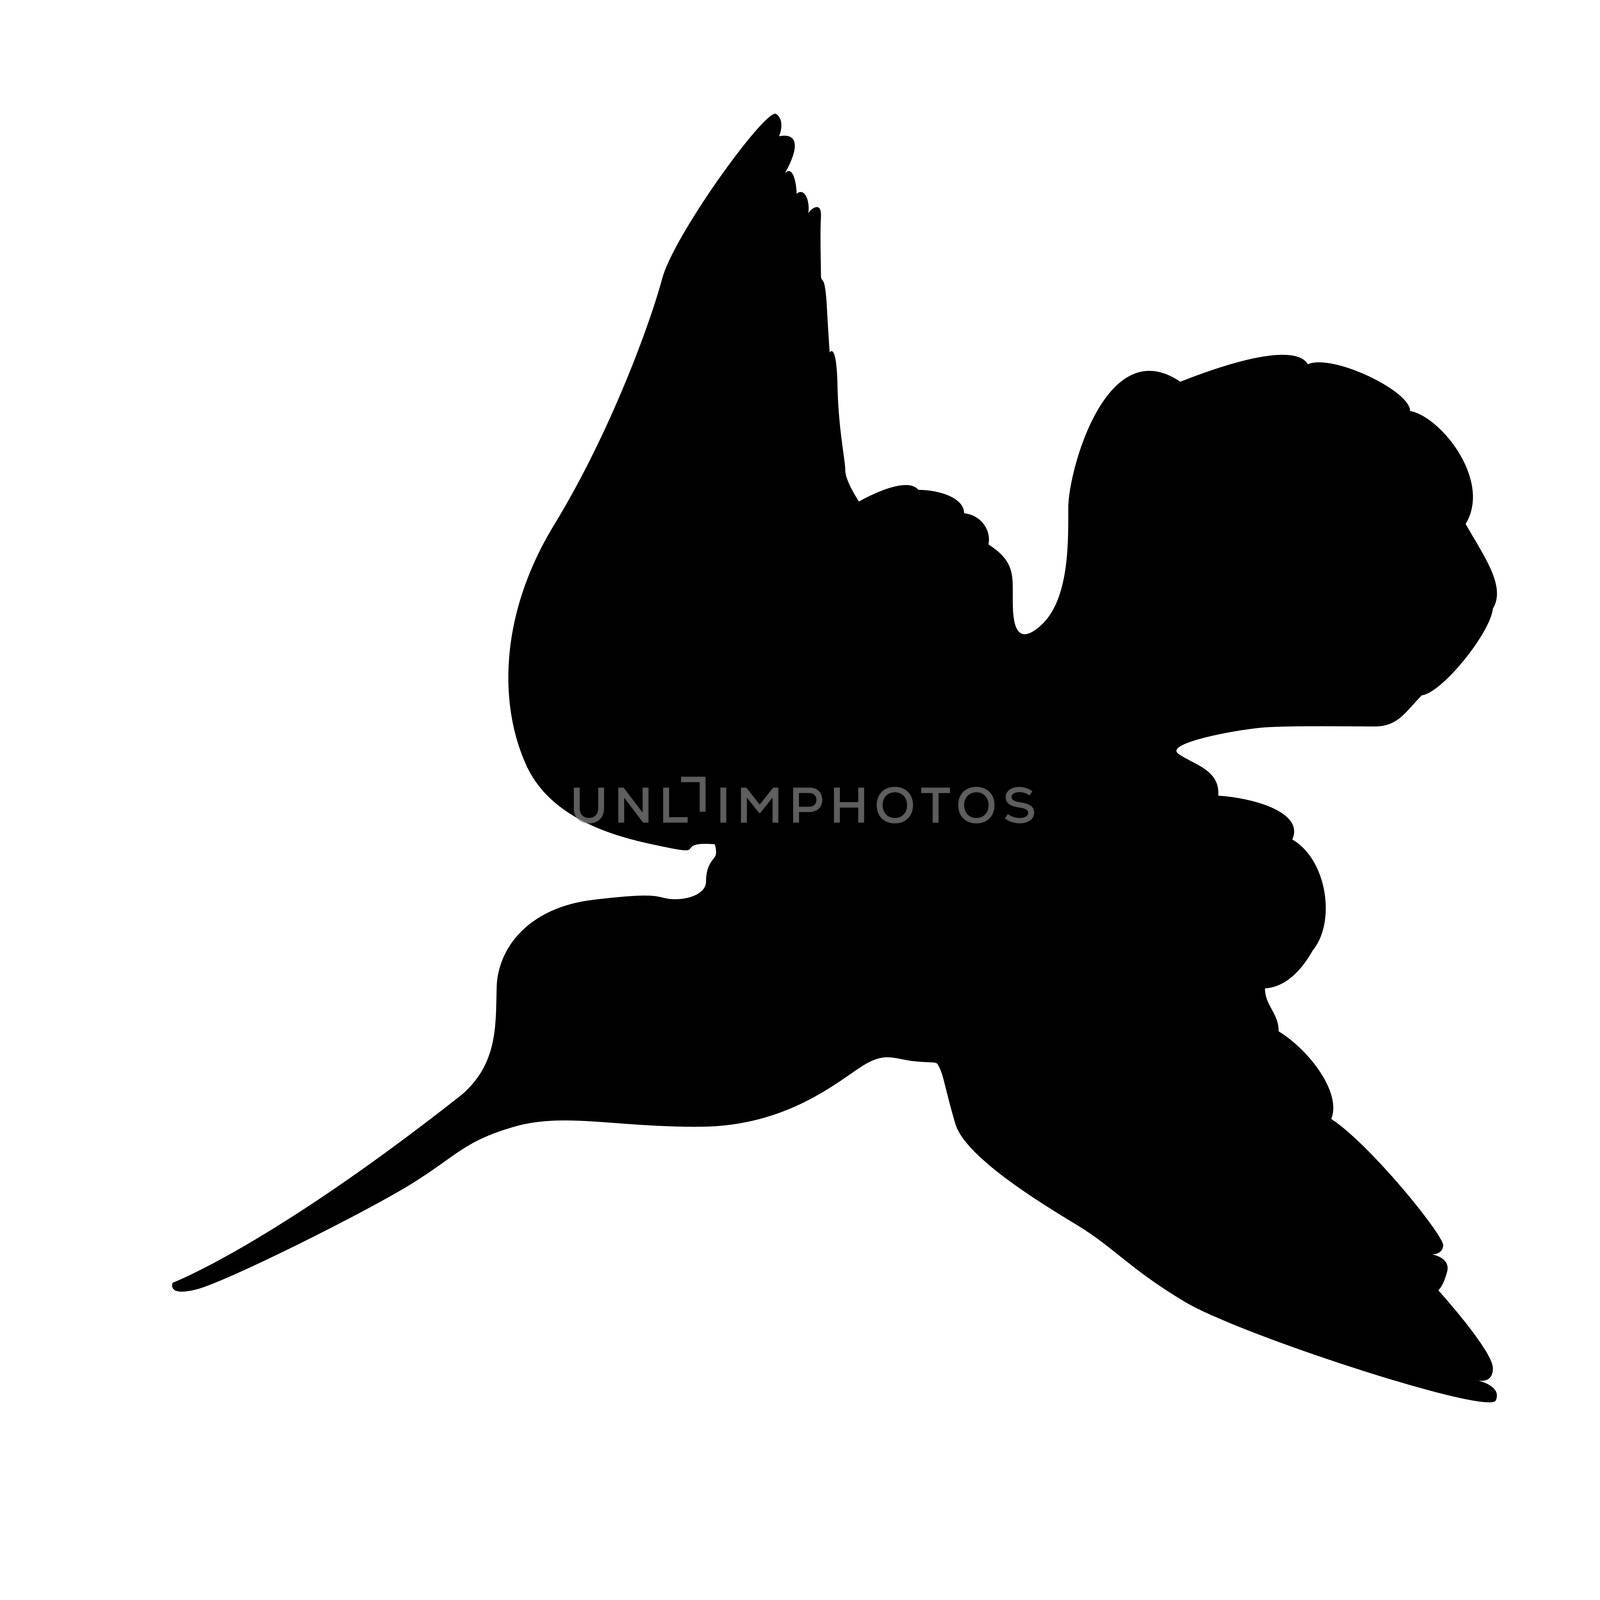 woodcock silhouette on white background, vector illustration